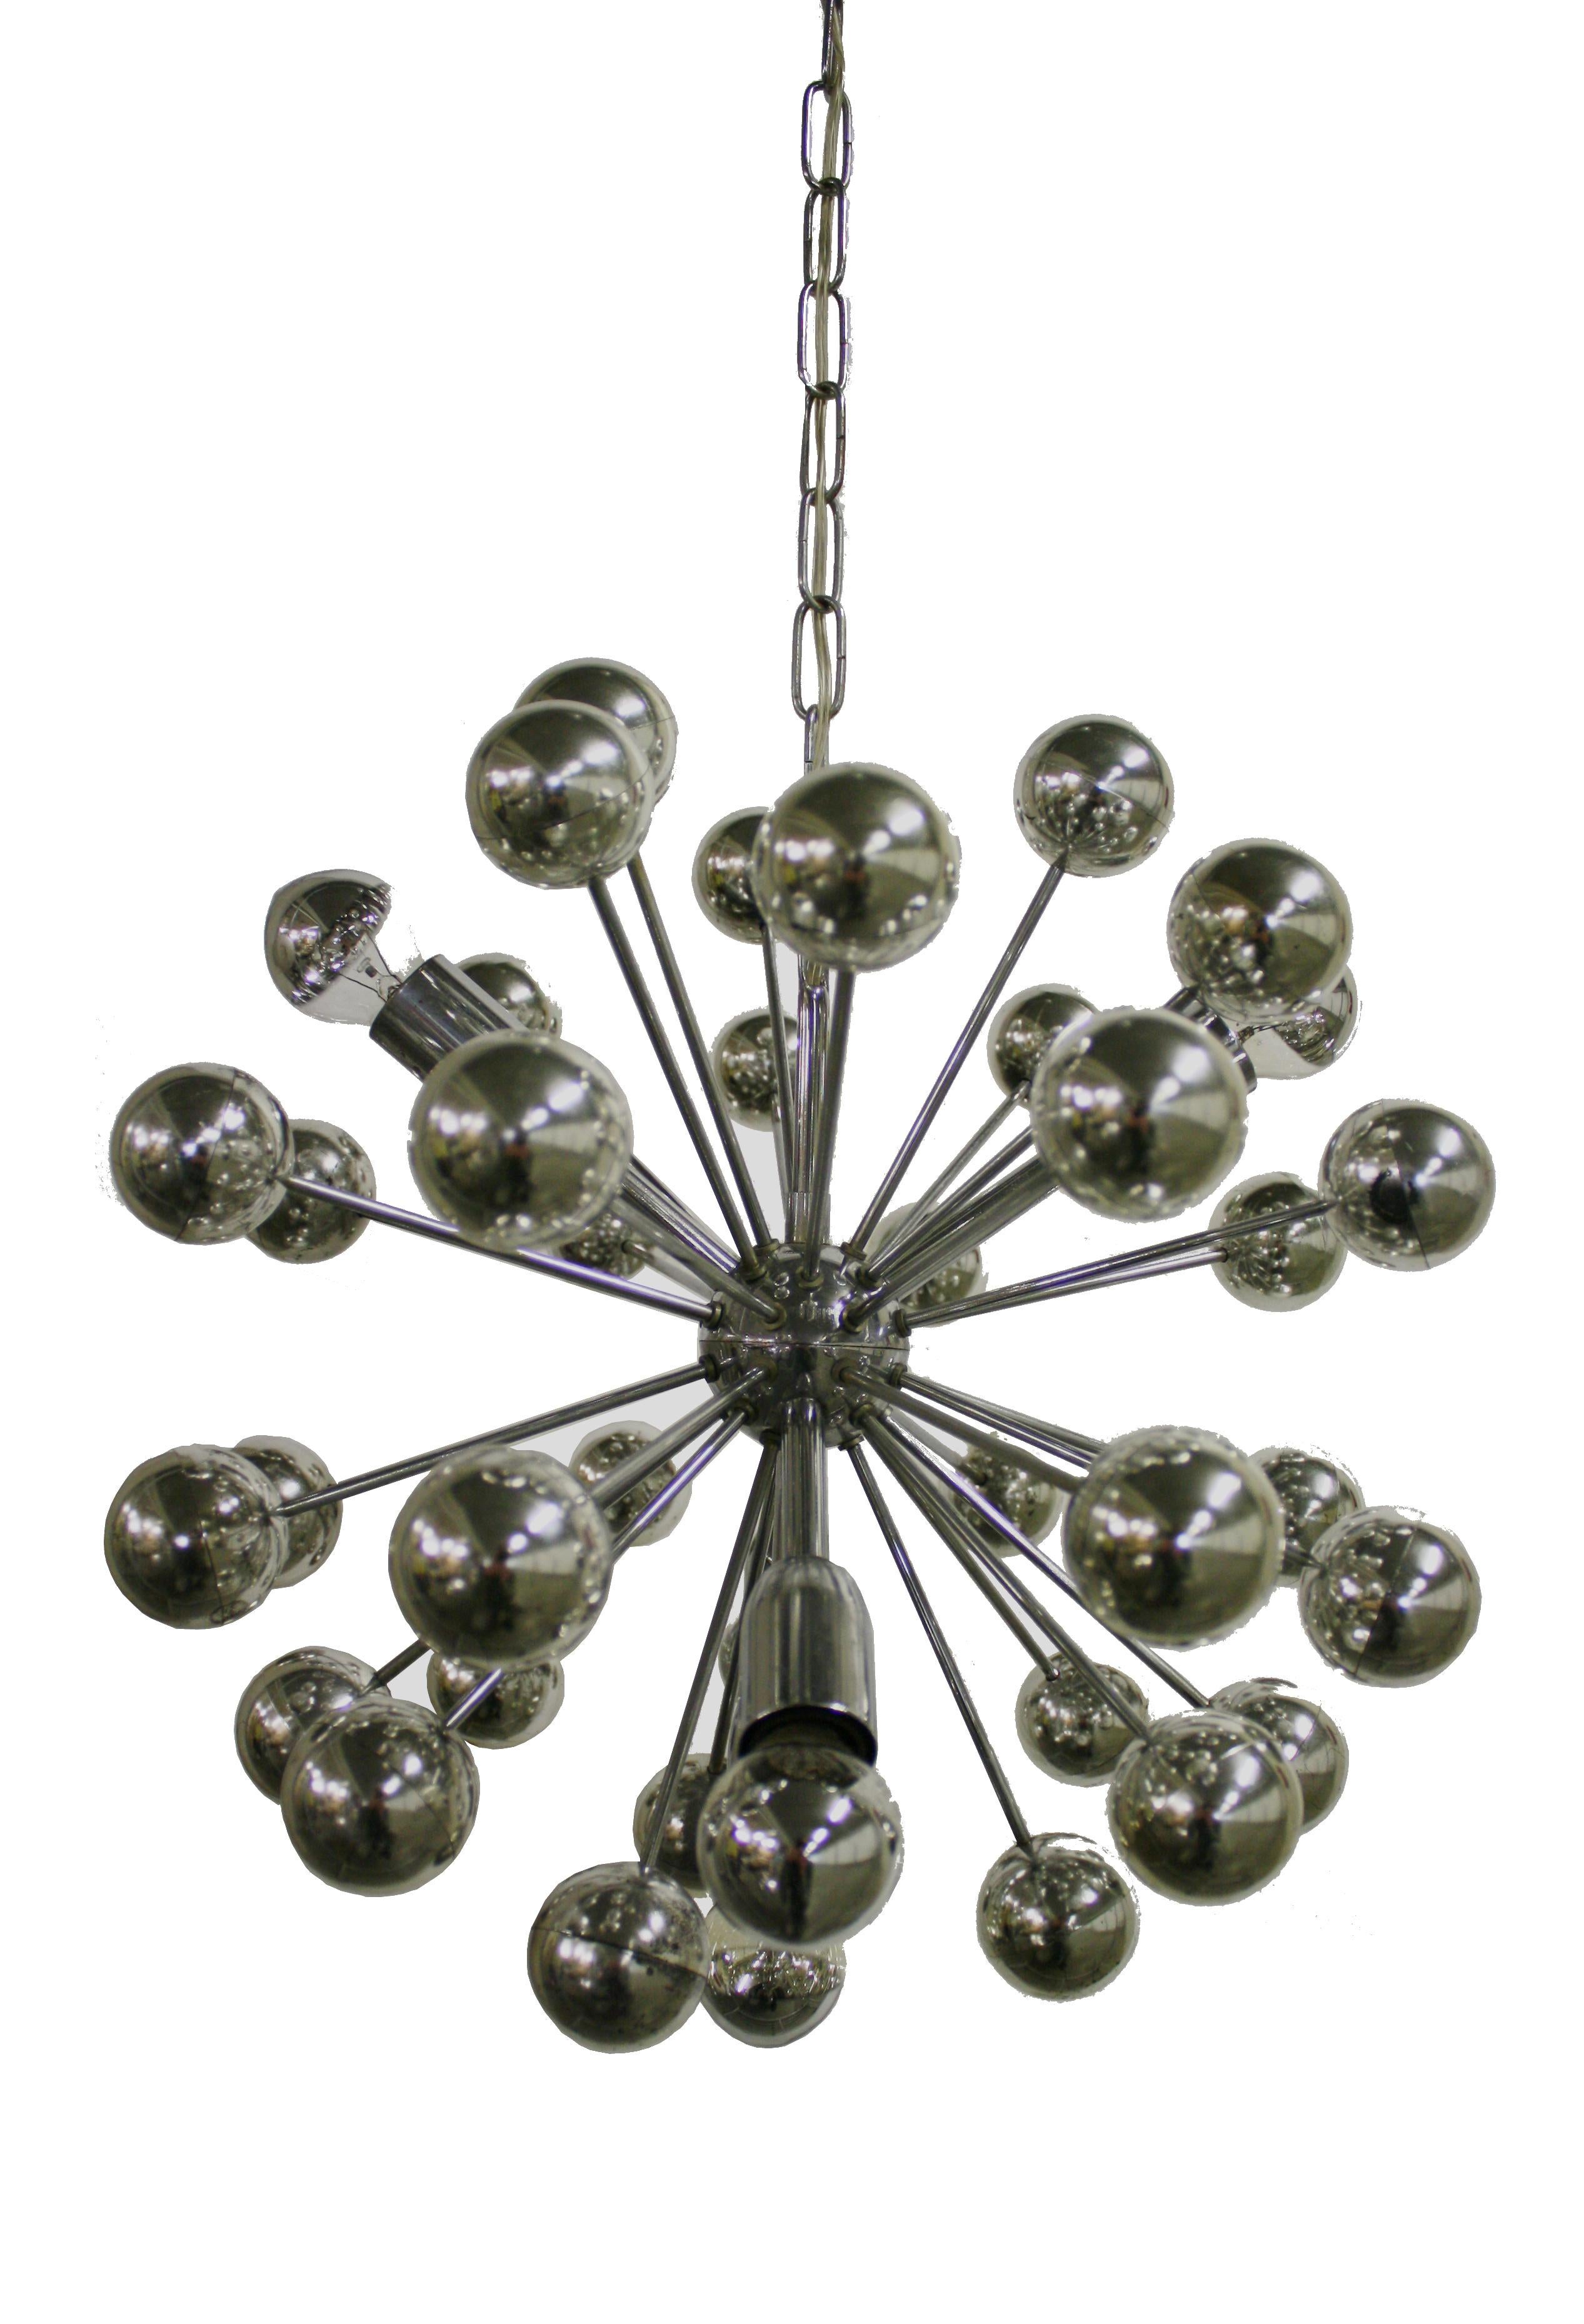 Sputnik chandelier with chromed metal sockets, arms and body interspersed with chrome plated plastic spheres.

The chandelier creates a beautiful effect.

Tested and ready for use. To be used with regular E14 light bulbs.

The chandelier is in